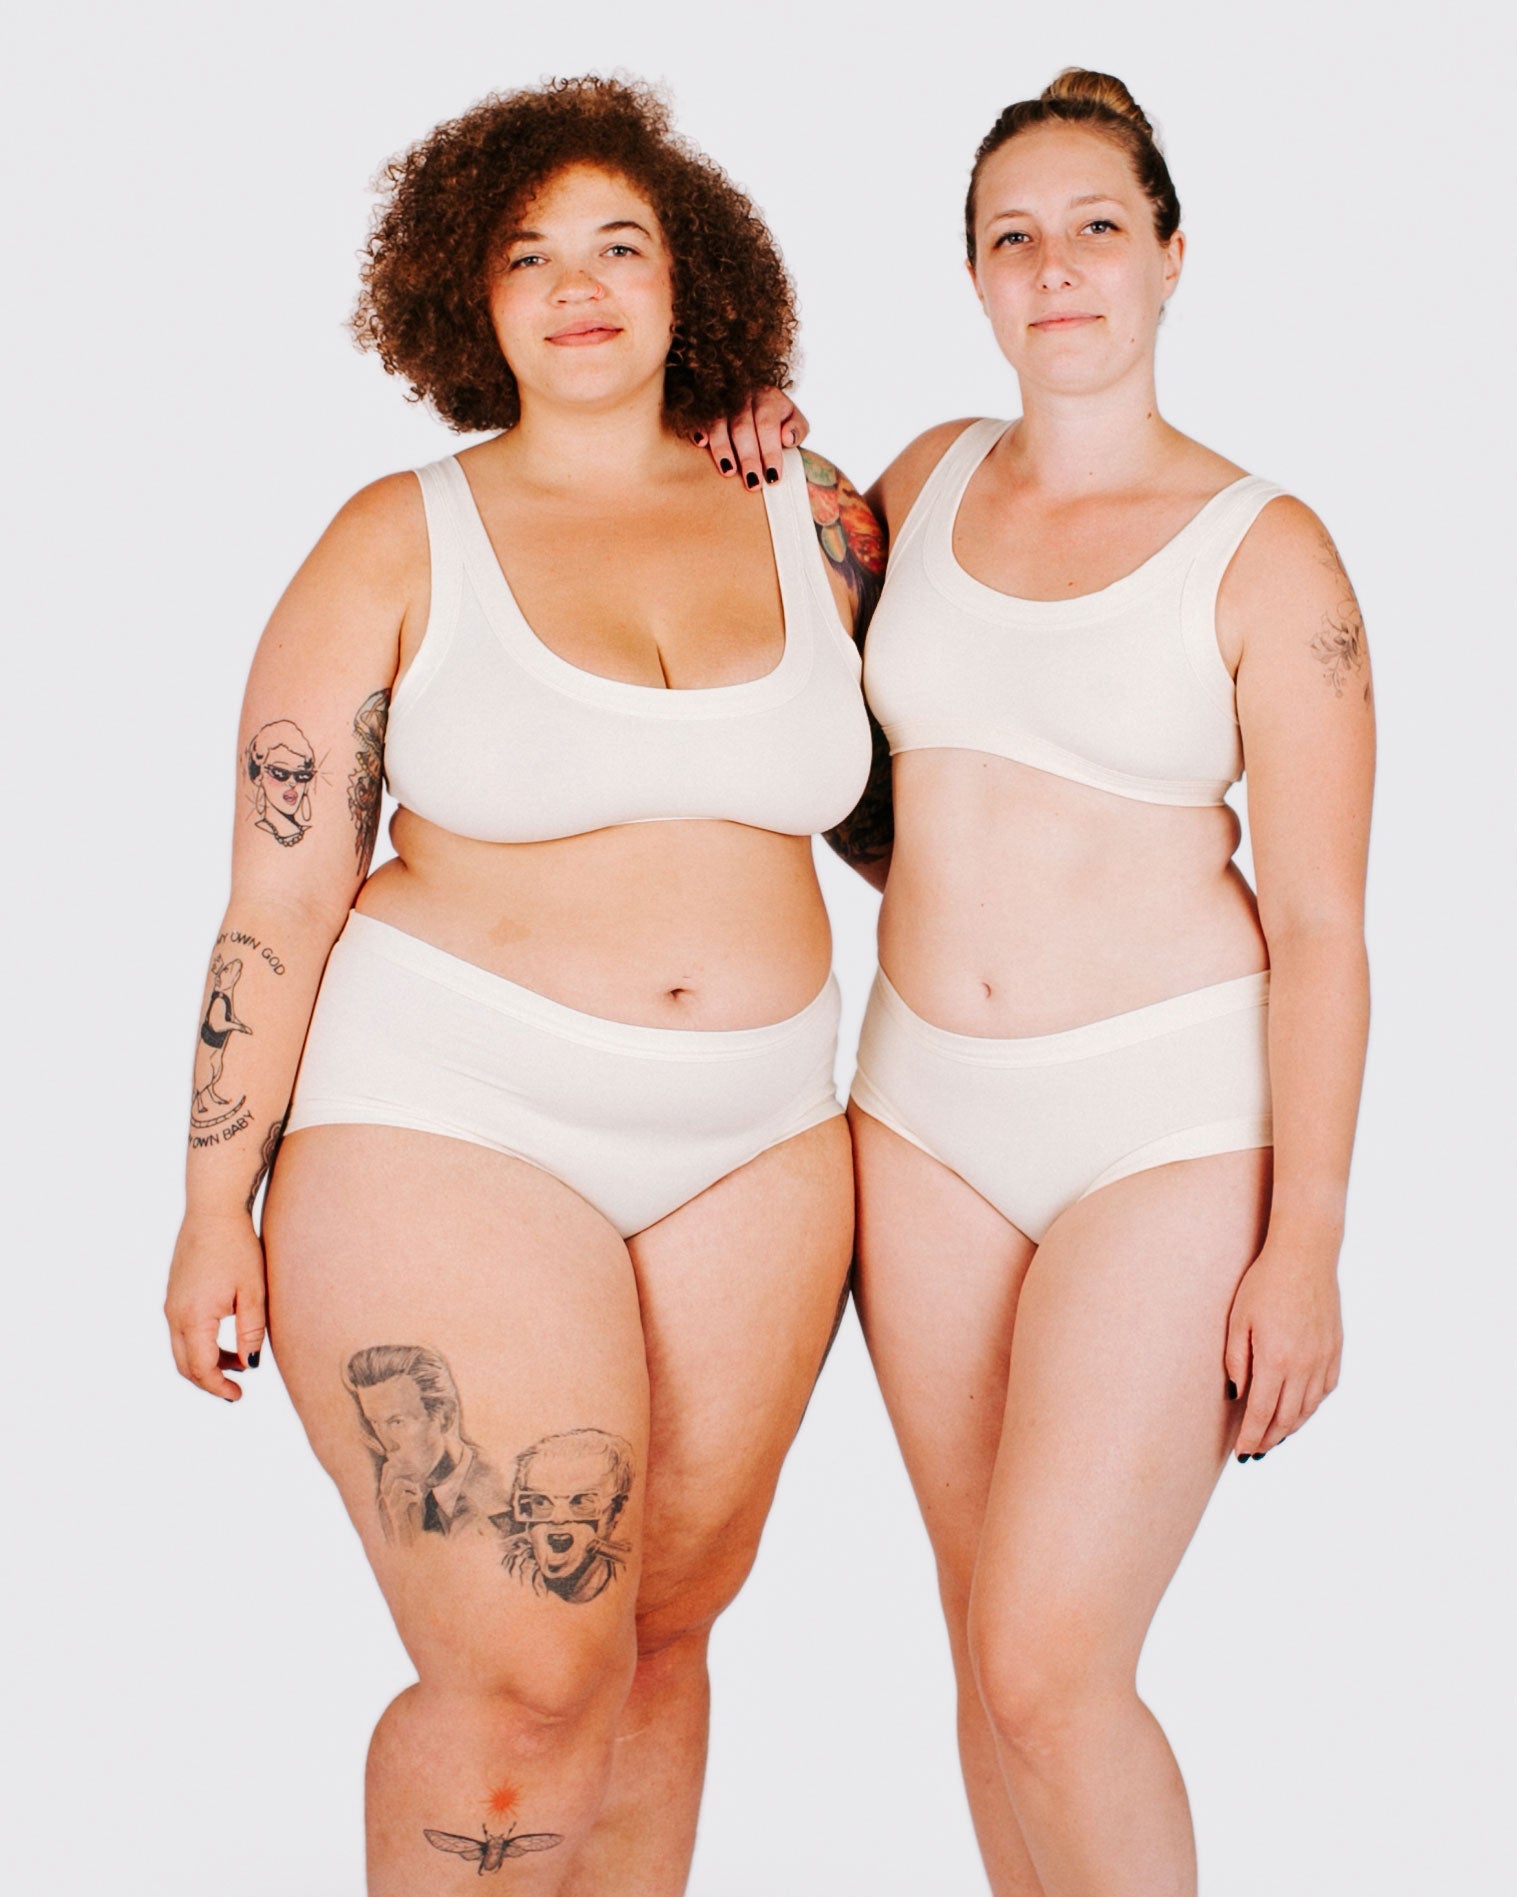 Fit photo from the front of Thunderpants organic cotton Hipster style underwear and Bralette in off-white on two models standing together.